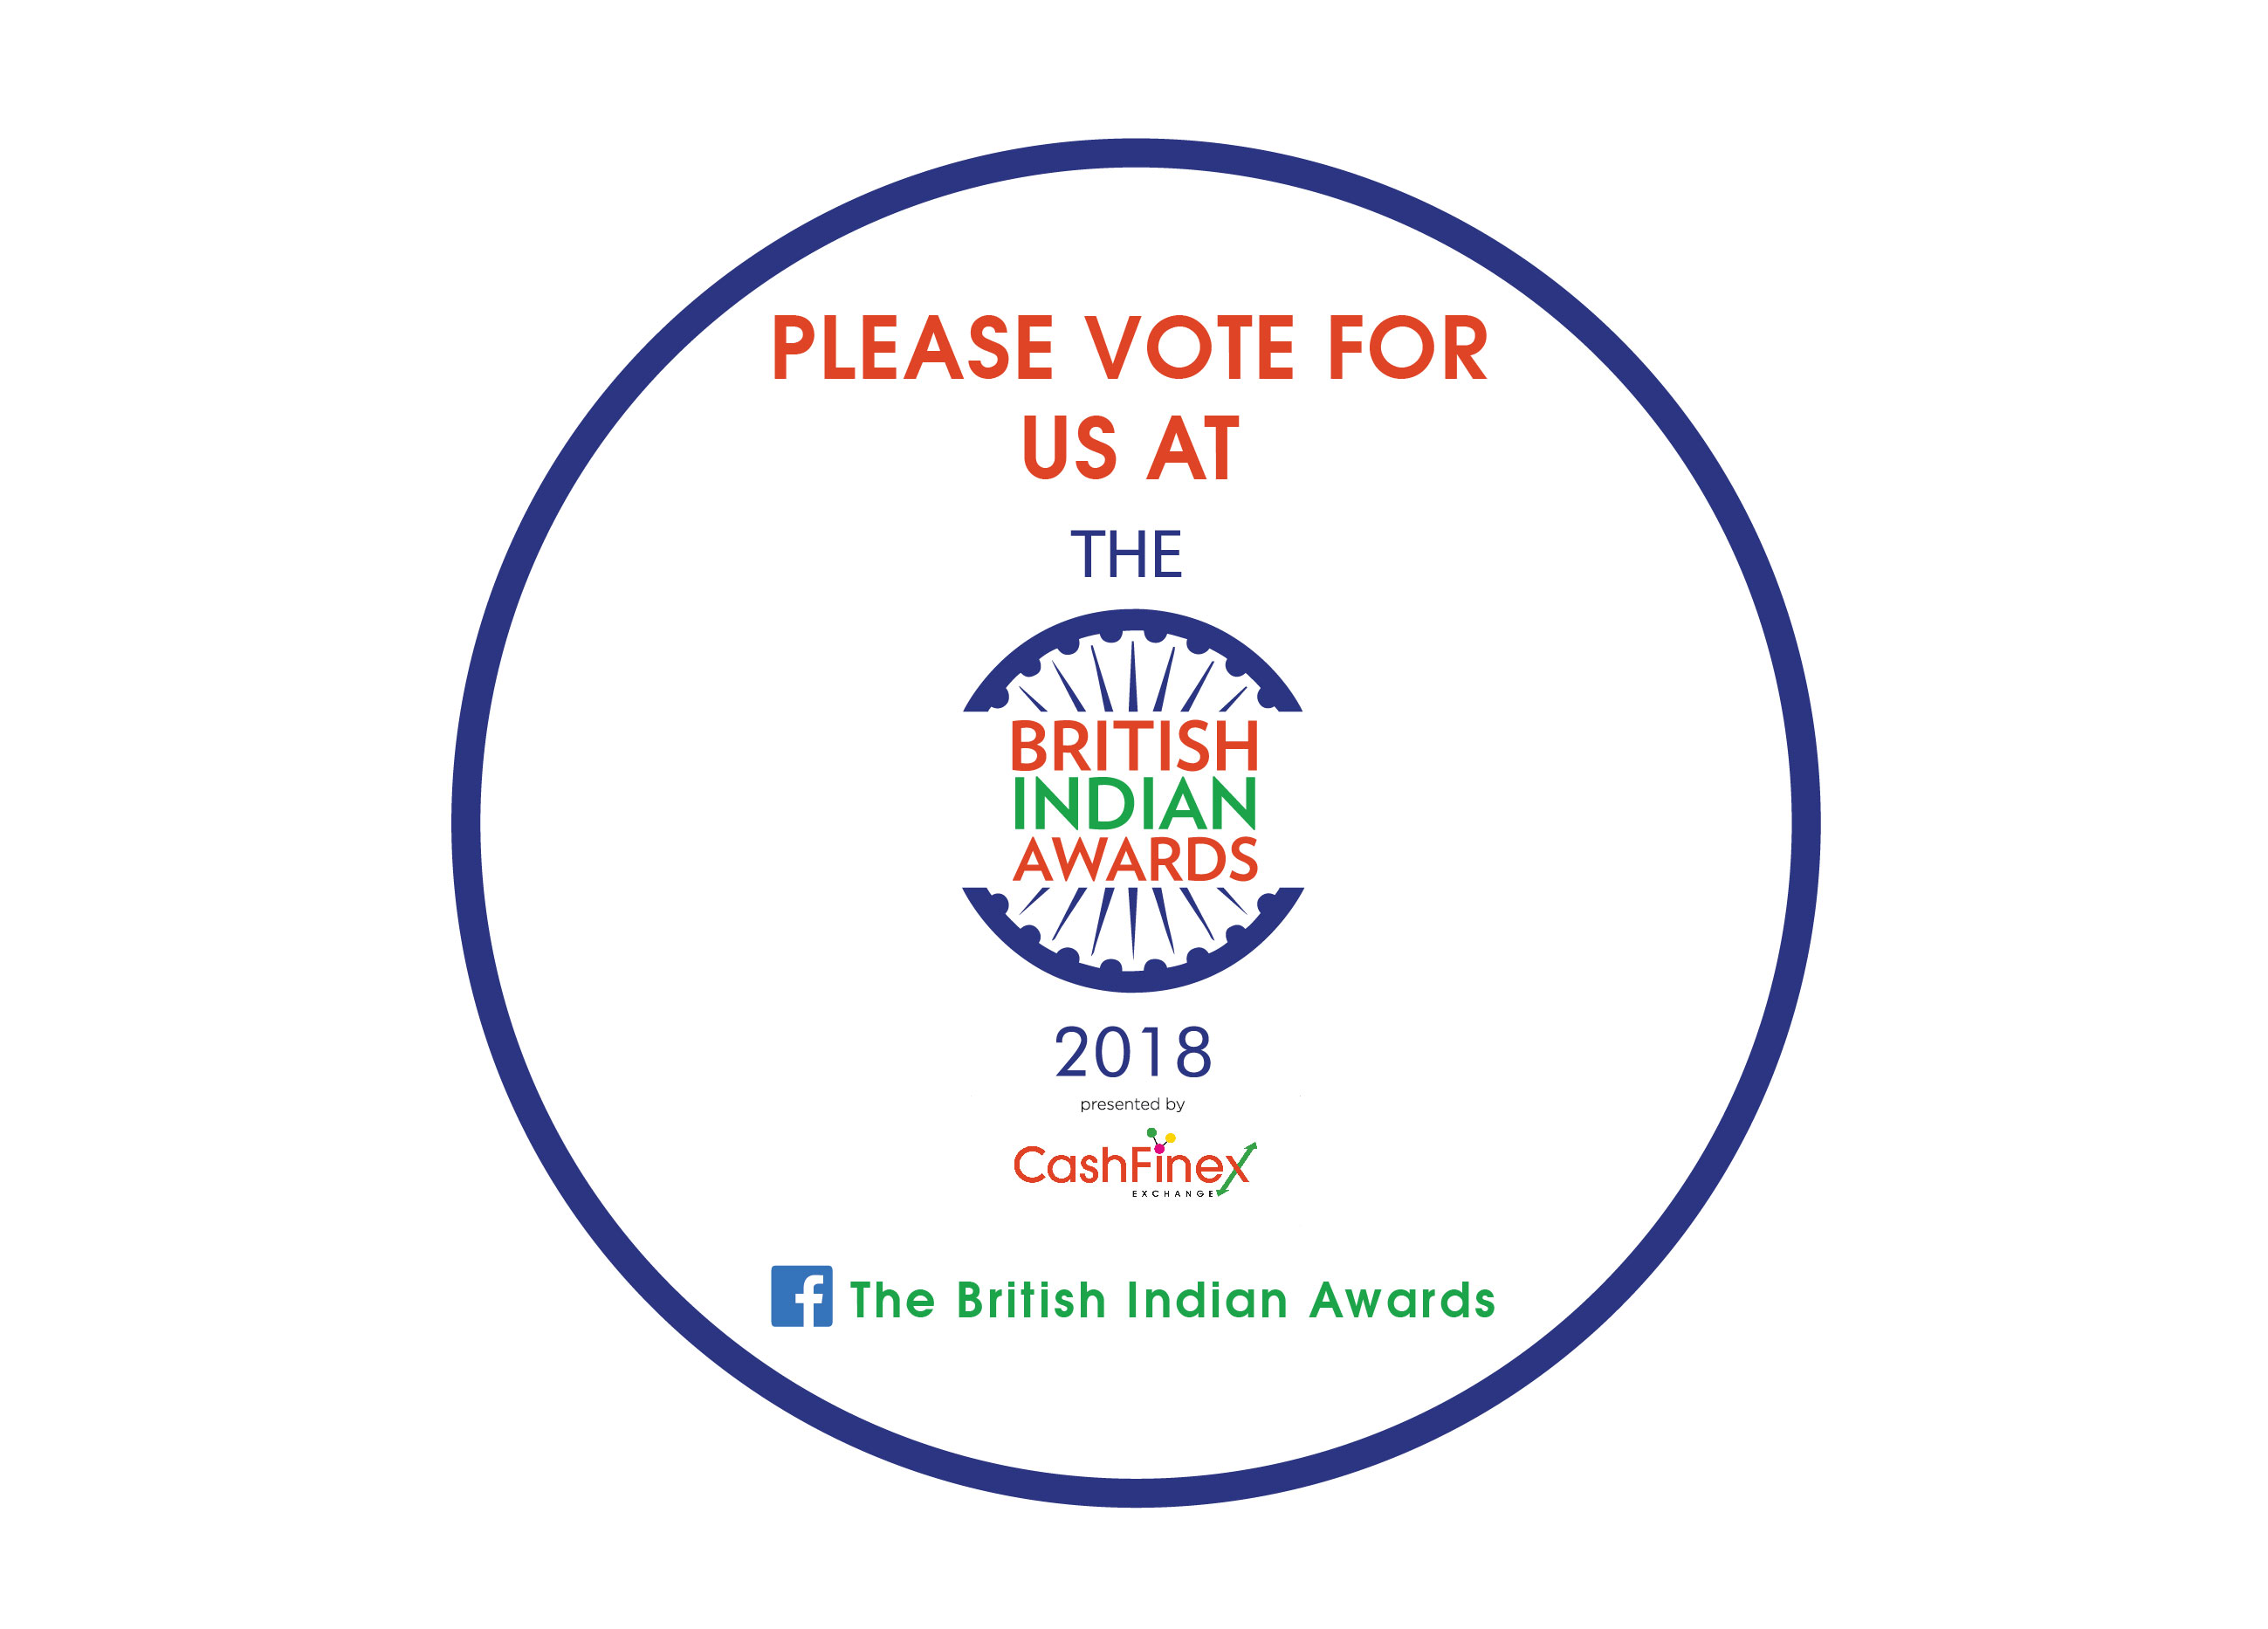 6th annual British Indian Awards Presented by CashFinex now to take